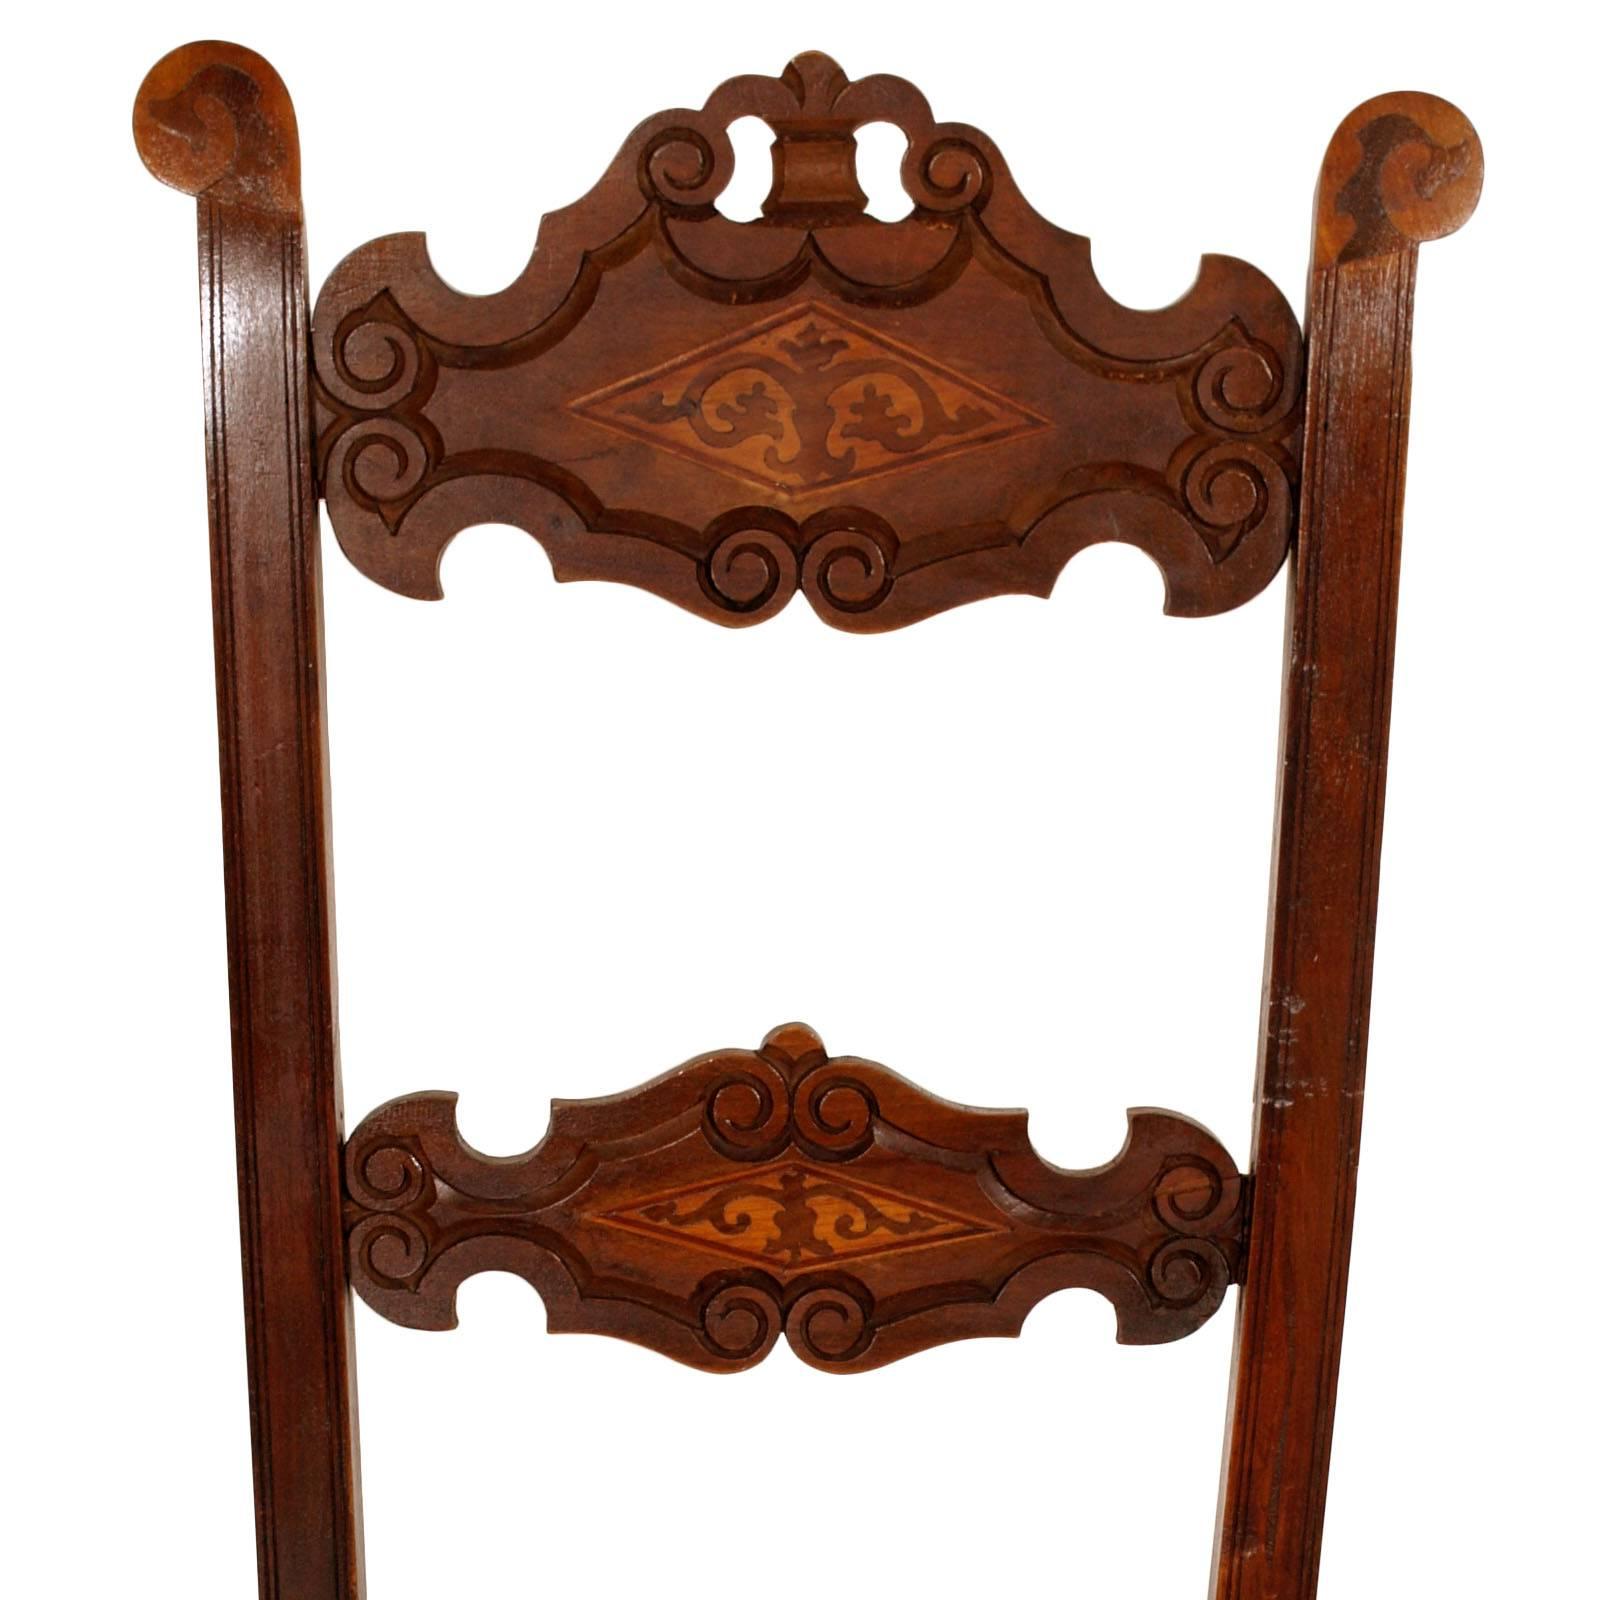 Late 19th century pair very elegant Venetian Gothic chairs in carved walnut, Very good  conditions, restored and wax-polished.
Back and front decorated with inlaid parts with walnut and light wood
Seat redone with new padding and damask